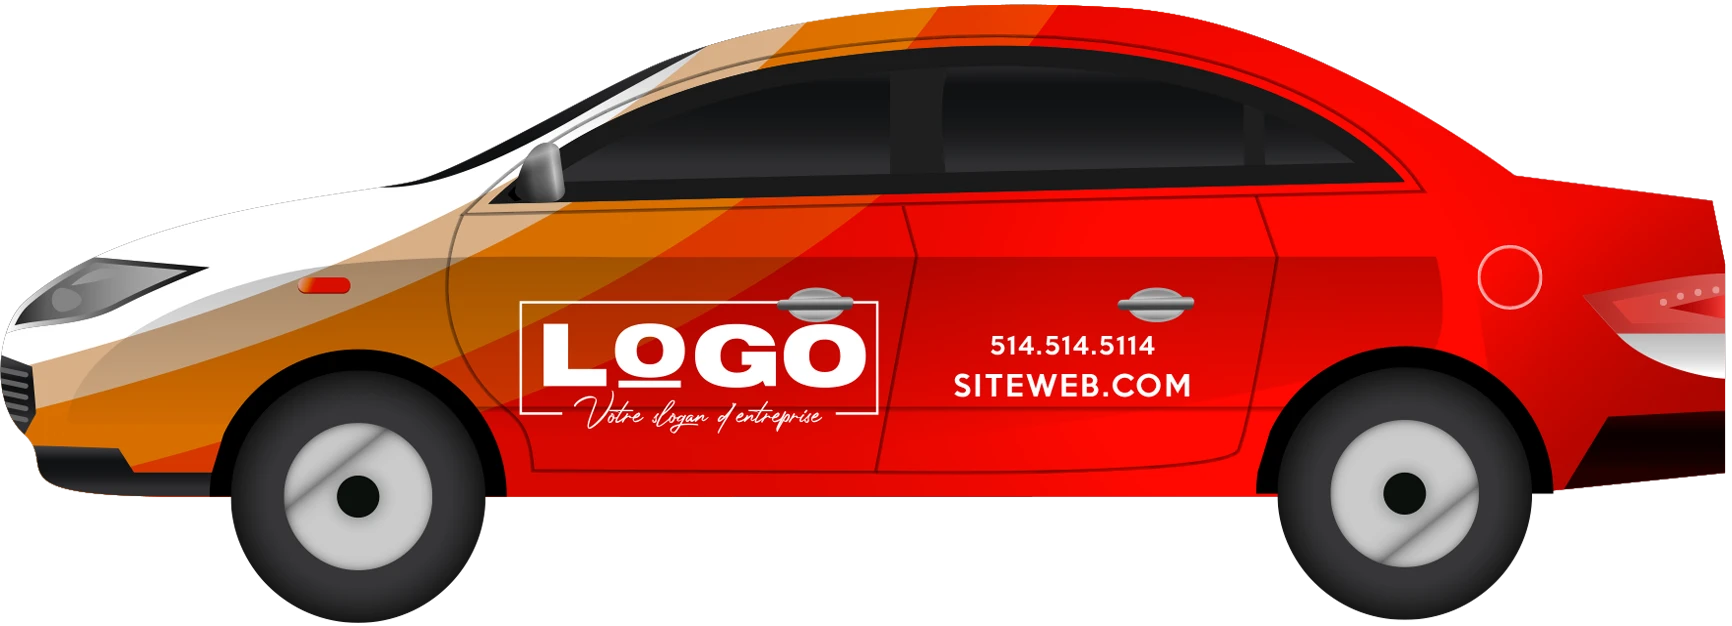 Lettering for full vehicle wrapping professional | Blainville, Saint-Jérôme